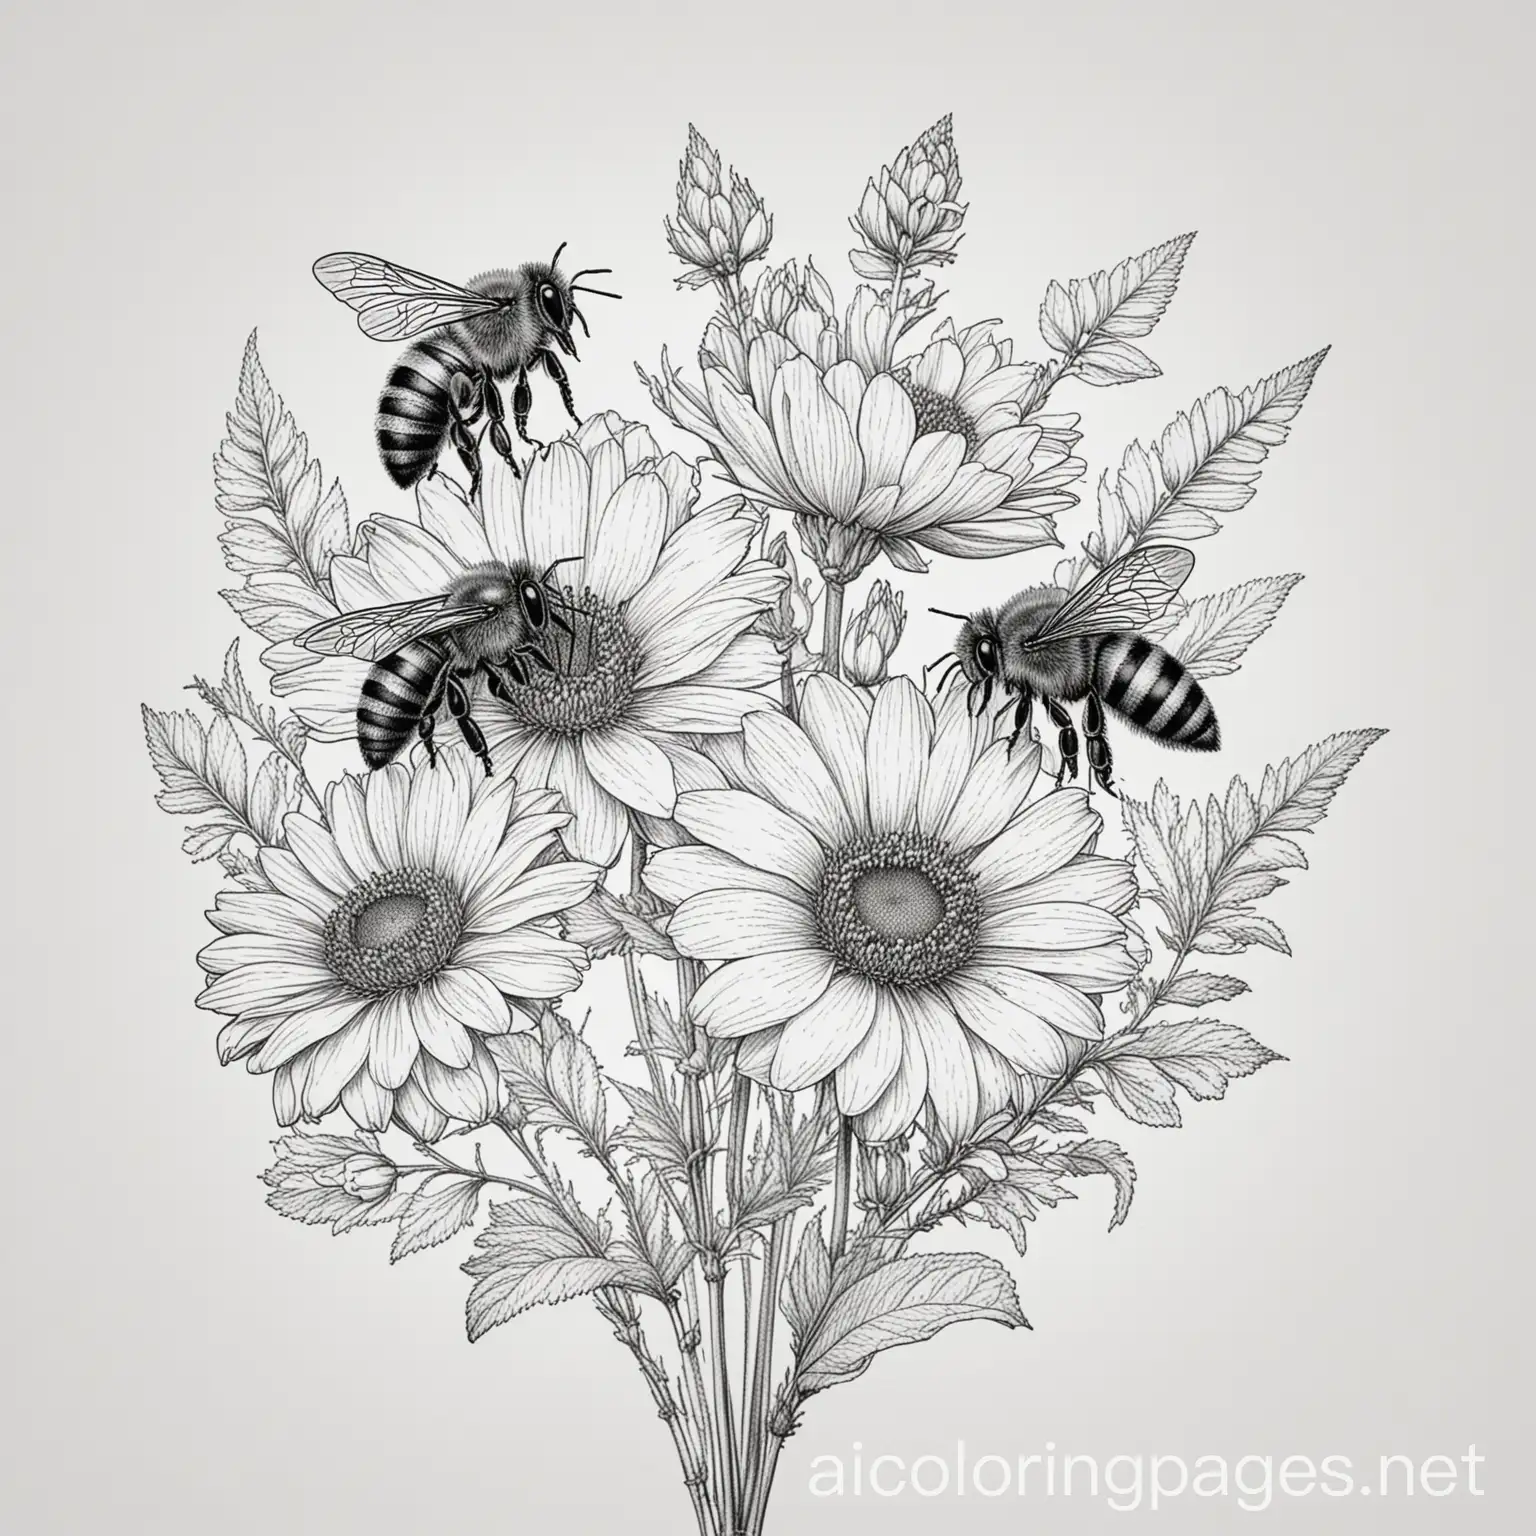 line drawing of  bees on flower


, Coloring Page, black and white, line art, white background, Simplicity, Ample White Space. The background of the coloring page is plain white to make it easy for young children to color within the lines. The outlines of all the subjects are easy to distinguish, making it simple for kids to color without too much difficulty